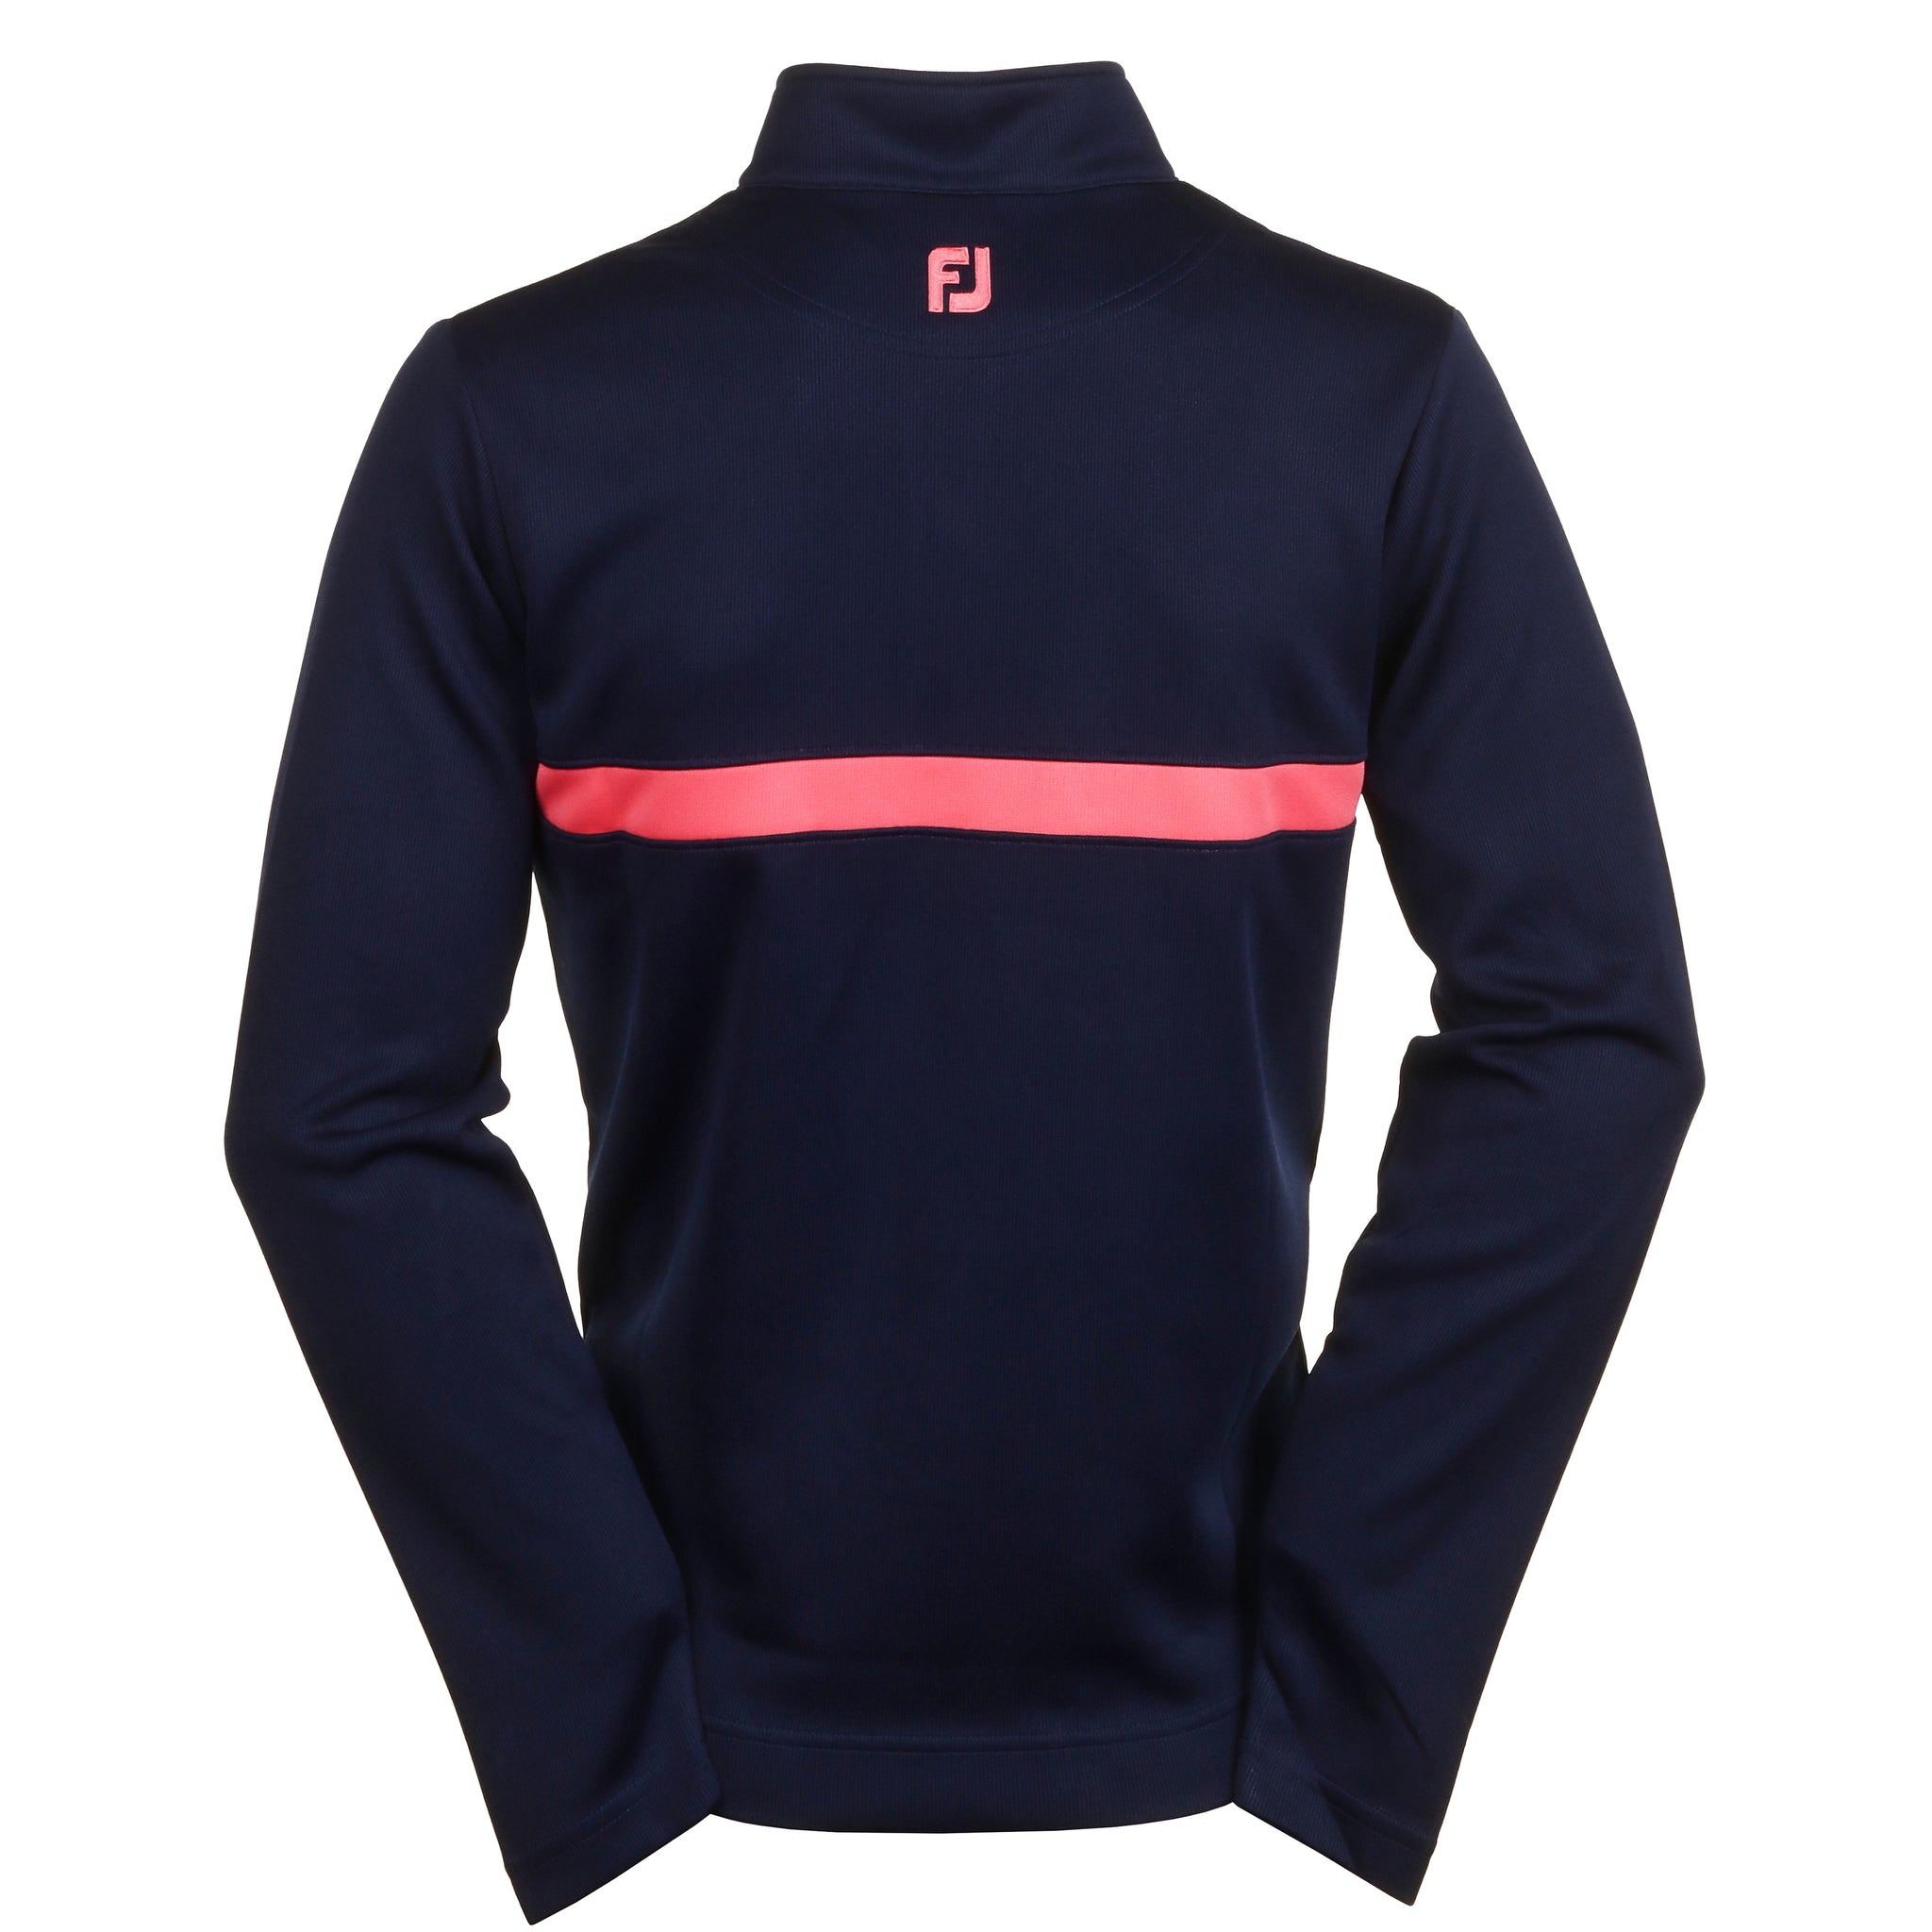 footjoy-inset-stripe-chill-out-pullover-81630-navy-coral-red